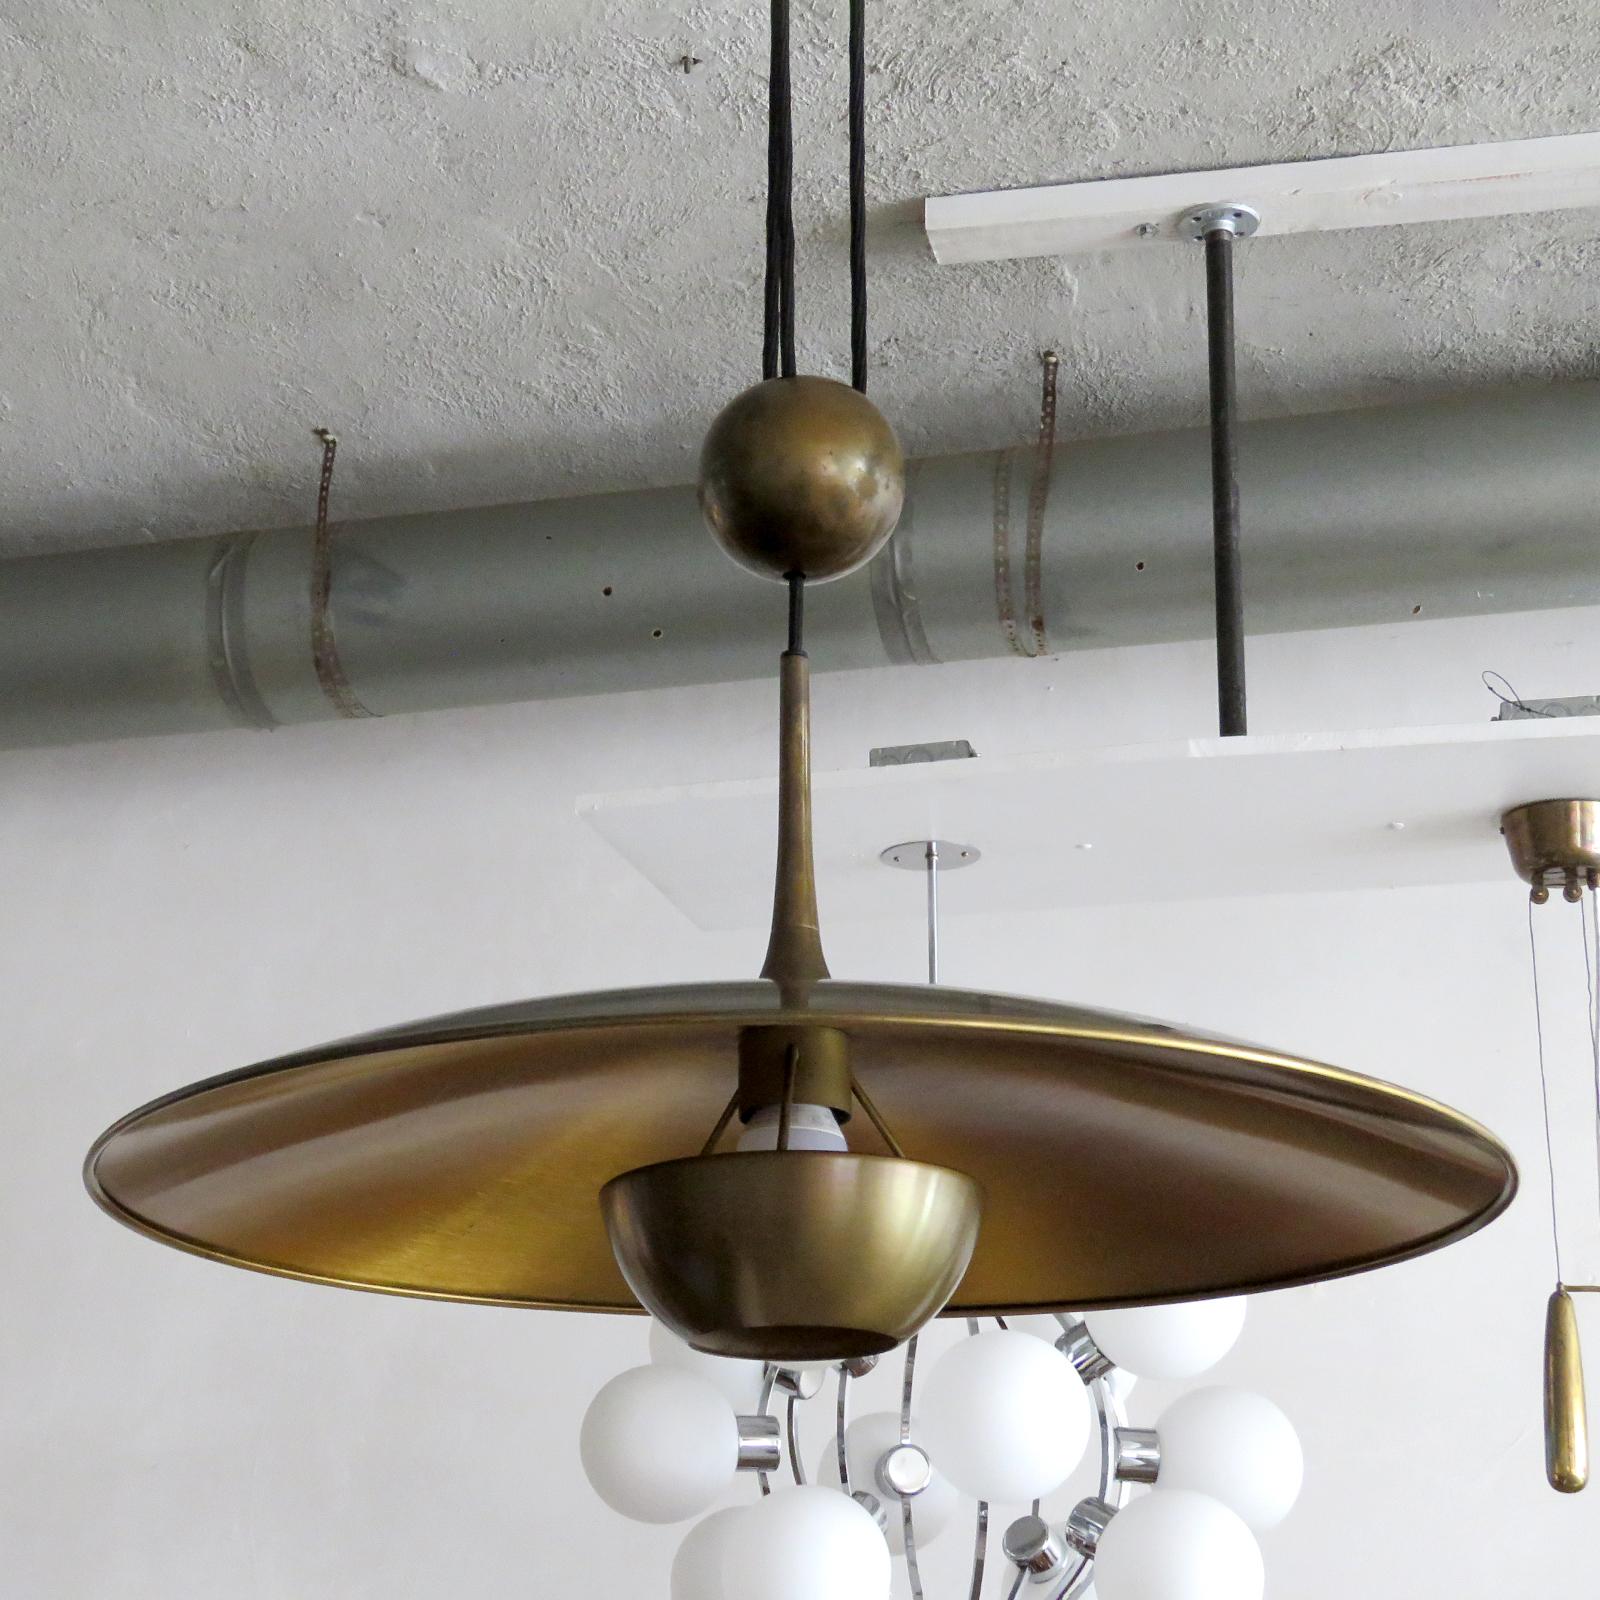 Wonderful large brass saucer pendant by Florian Schulz with central pulley mechanism, a heavy brass ball counter balances the weight of the fully adjustable shade.